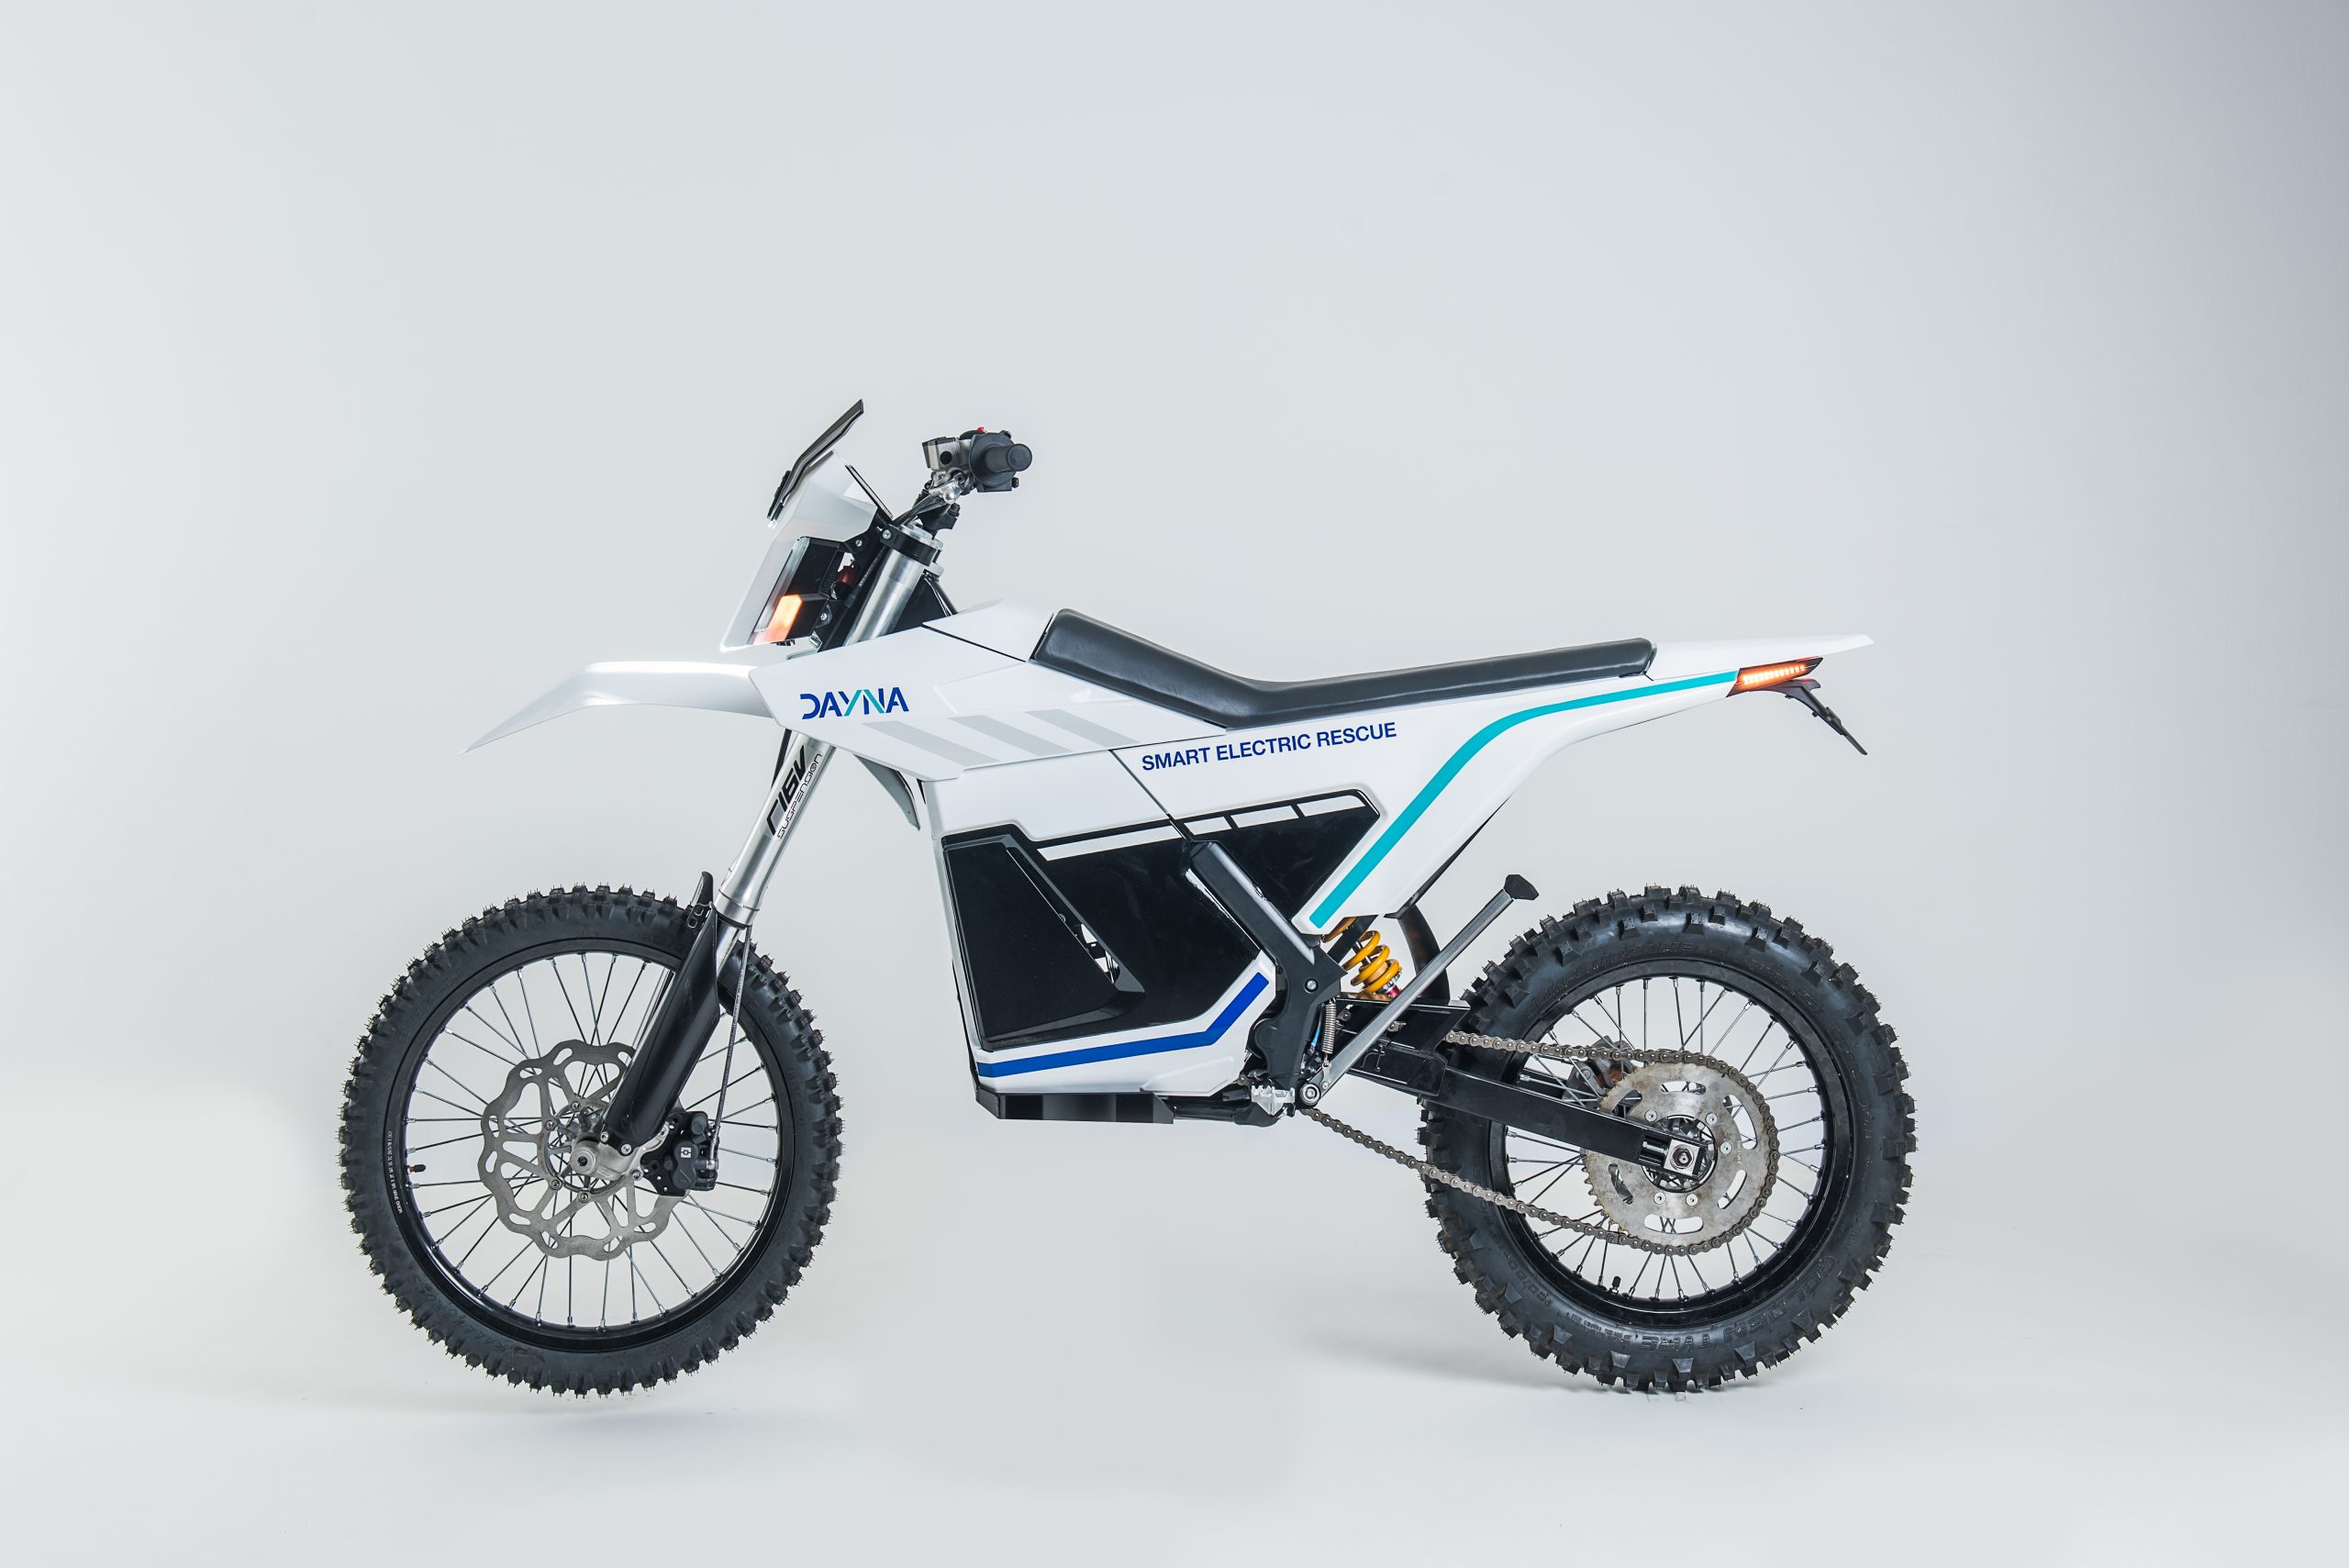 The DAYNA all-electric, intelligent mountain rescue motorcycle. Image via BNC3D.